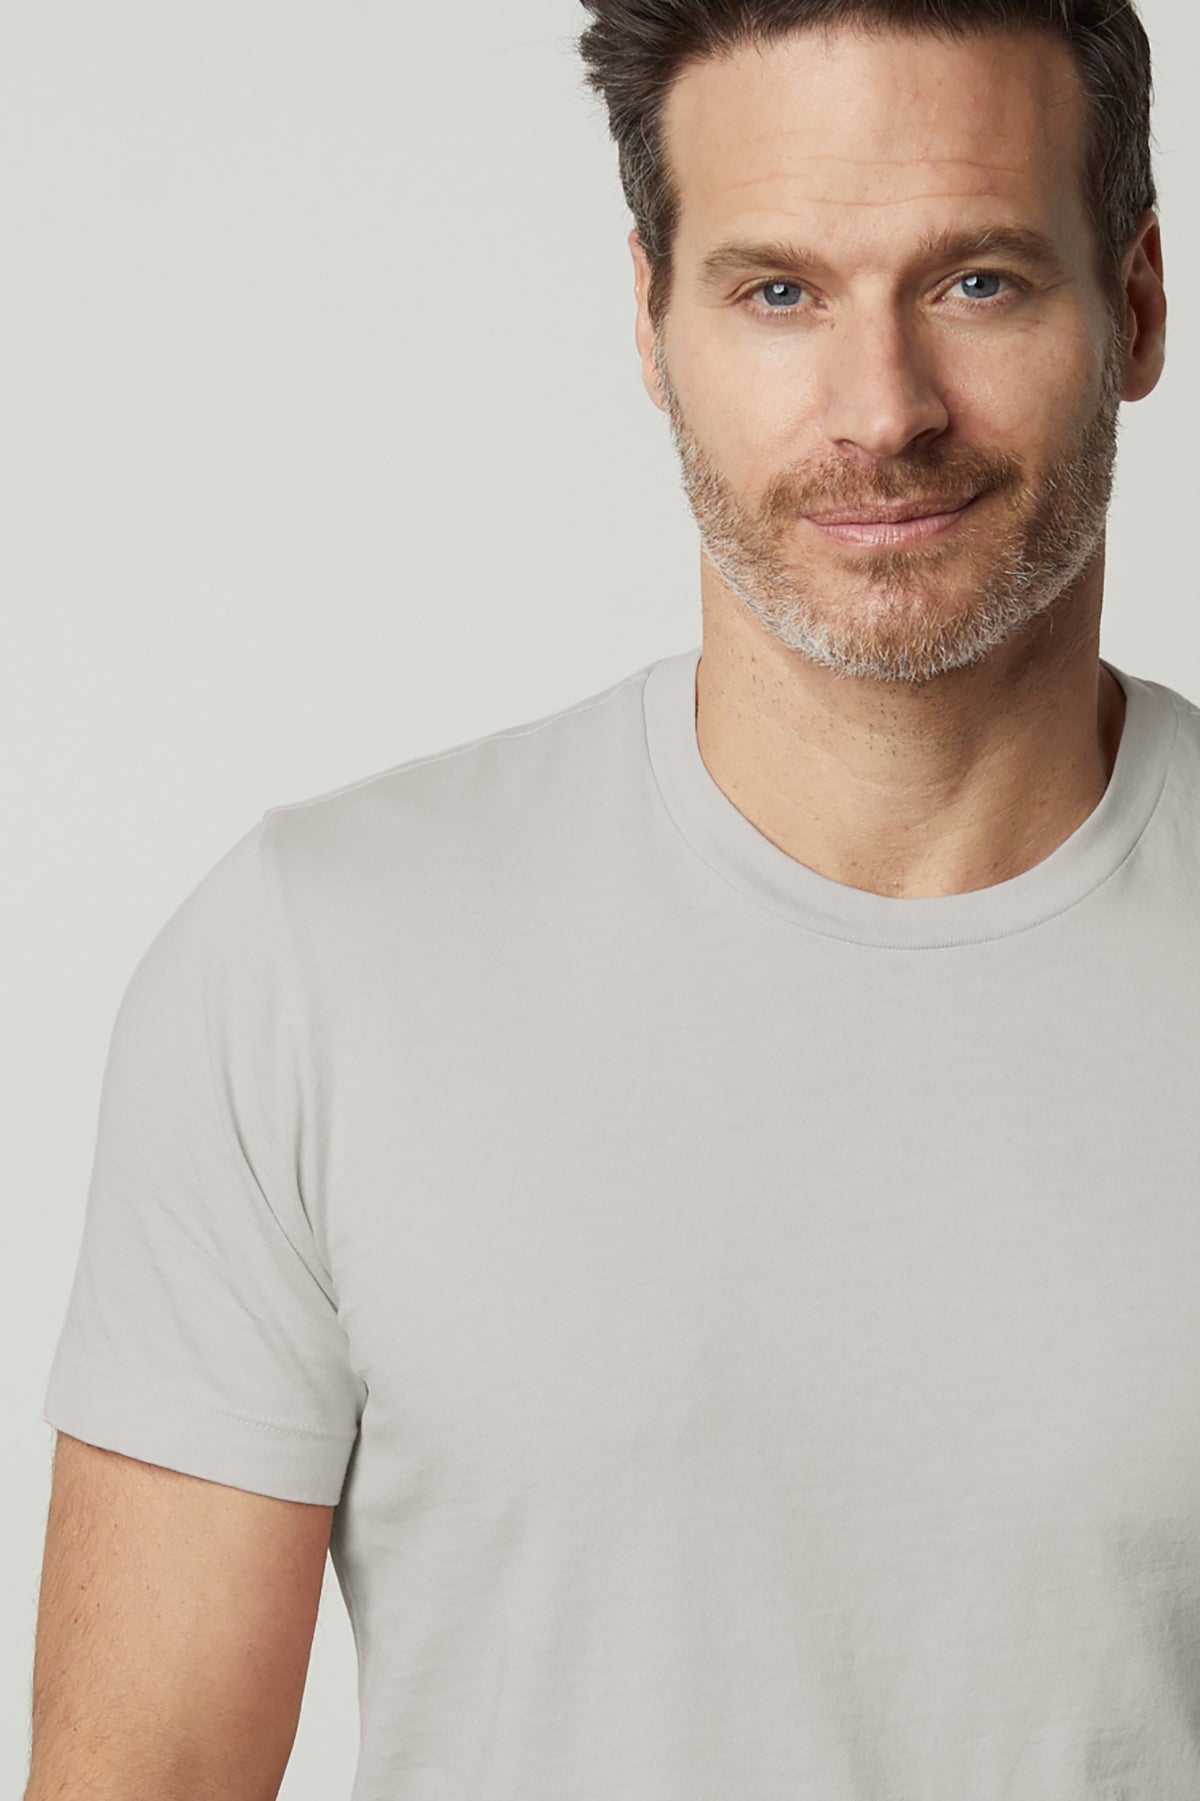   howard whisper classic crew neck tee in cement crew neck tee in cement close up sleeve view 